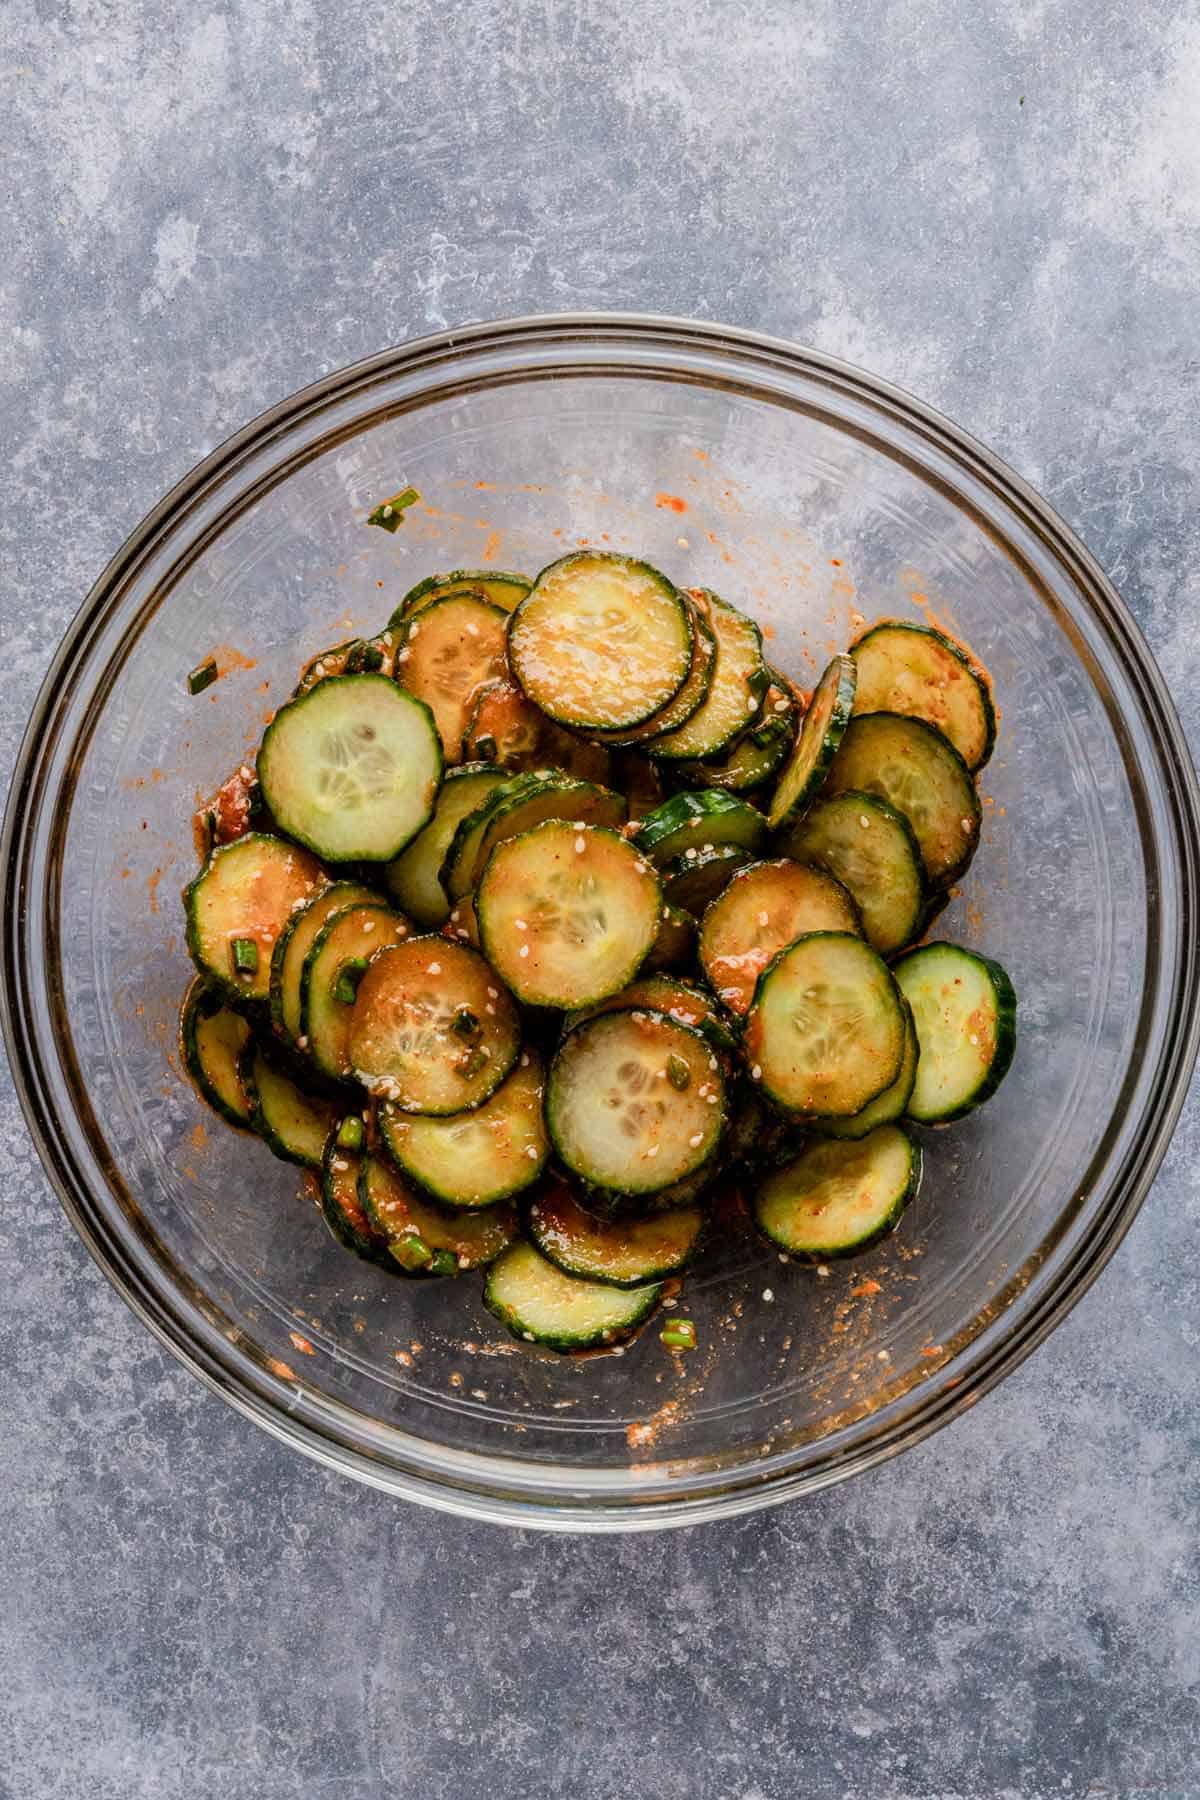 cucumber slices mixed in spicy dressing